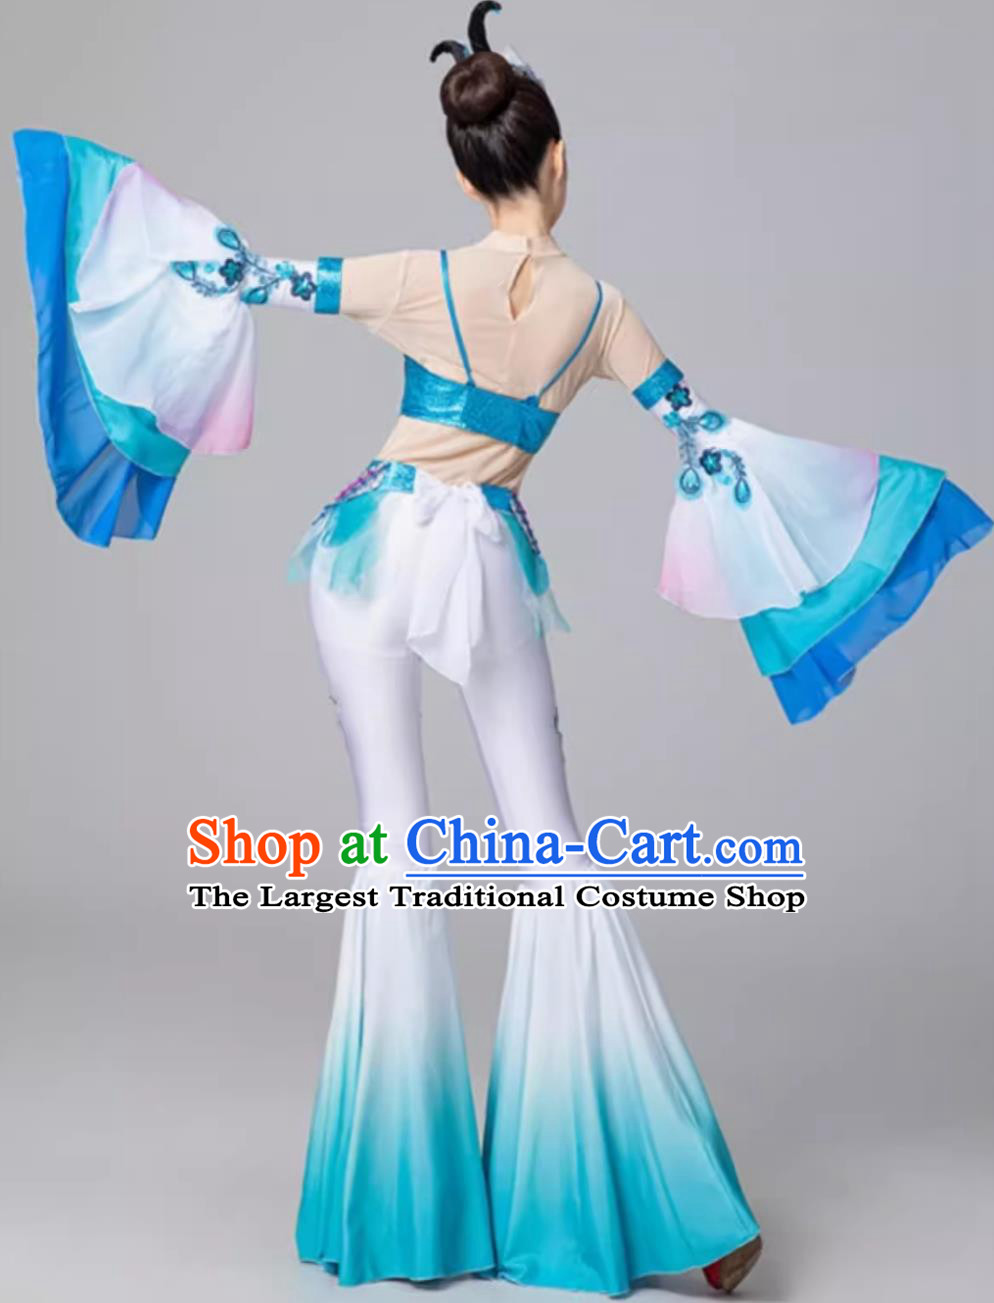 Ancient Chinese Super Immortal Classical Dance Dress Dunhuang Feitian Dance Costume Exotic Performance Clothing